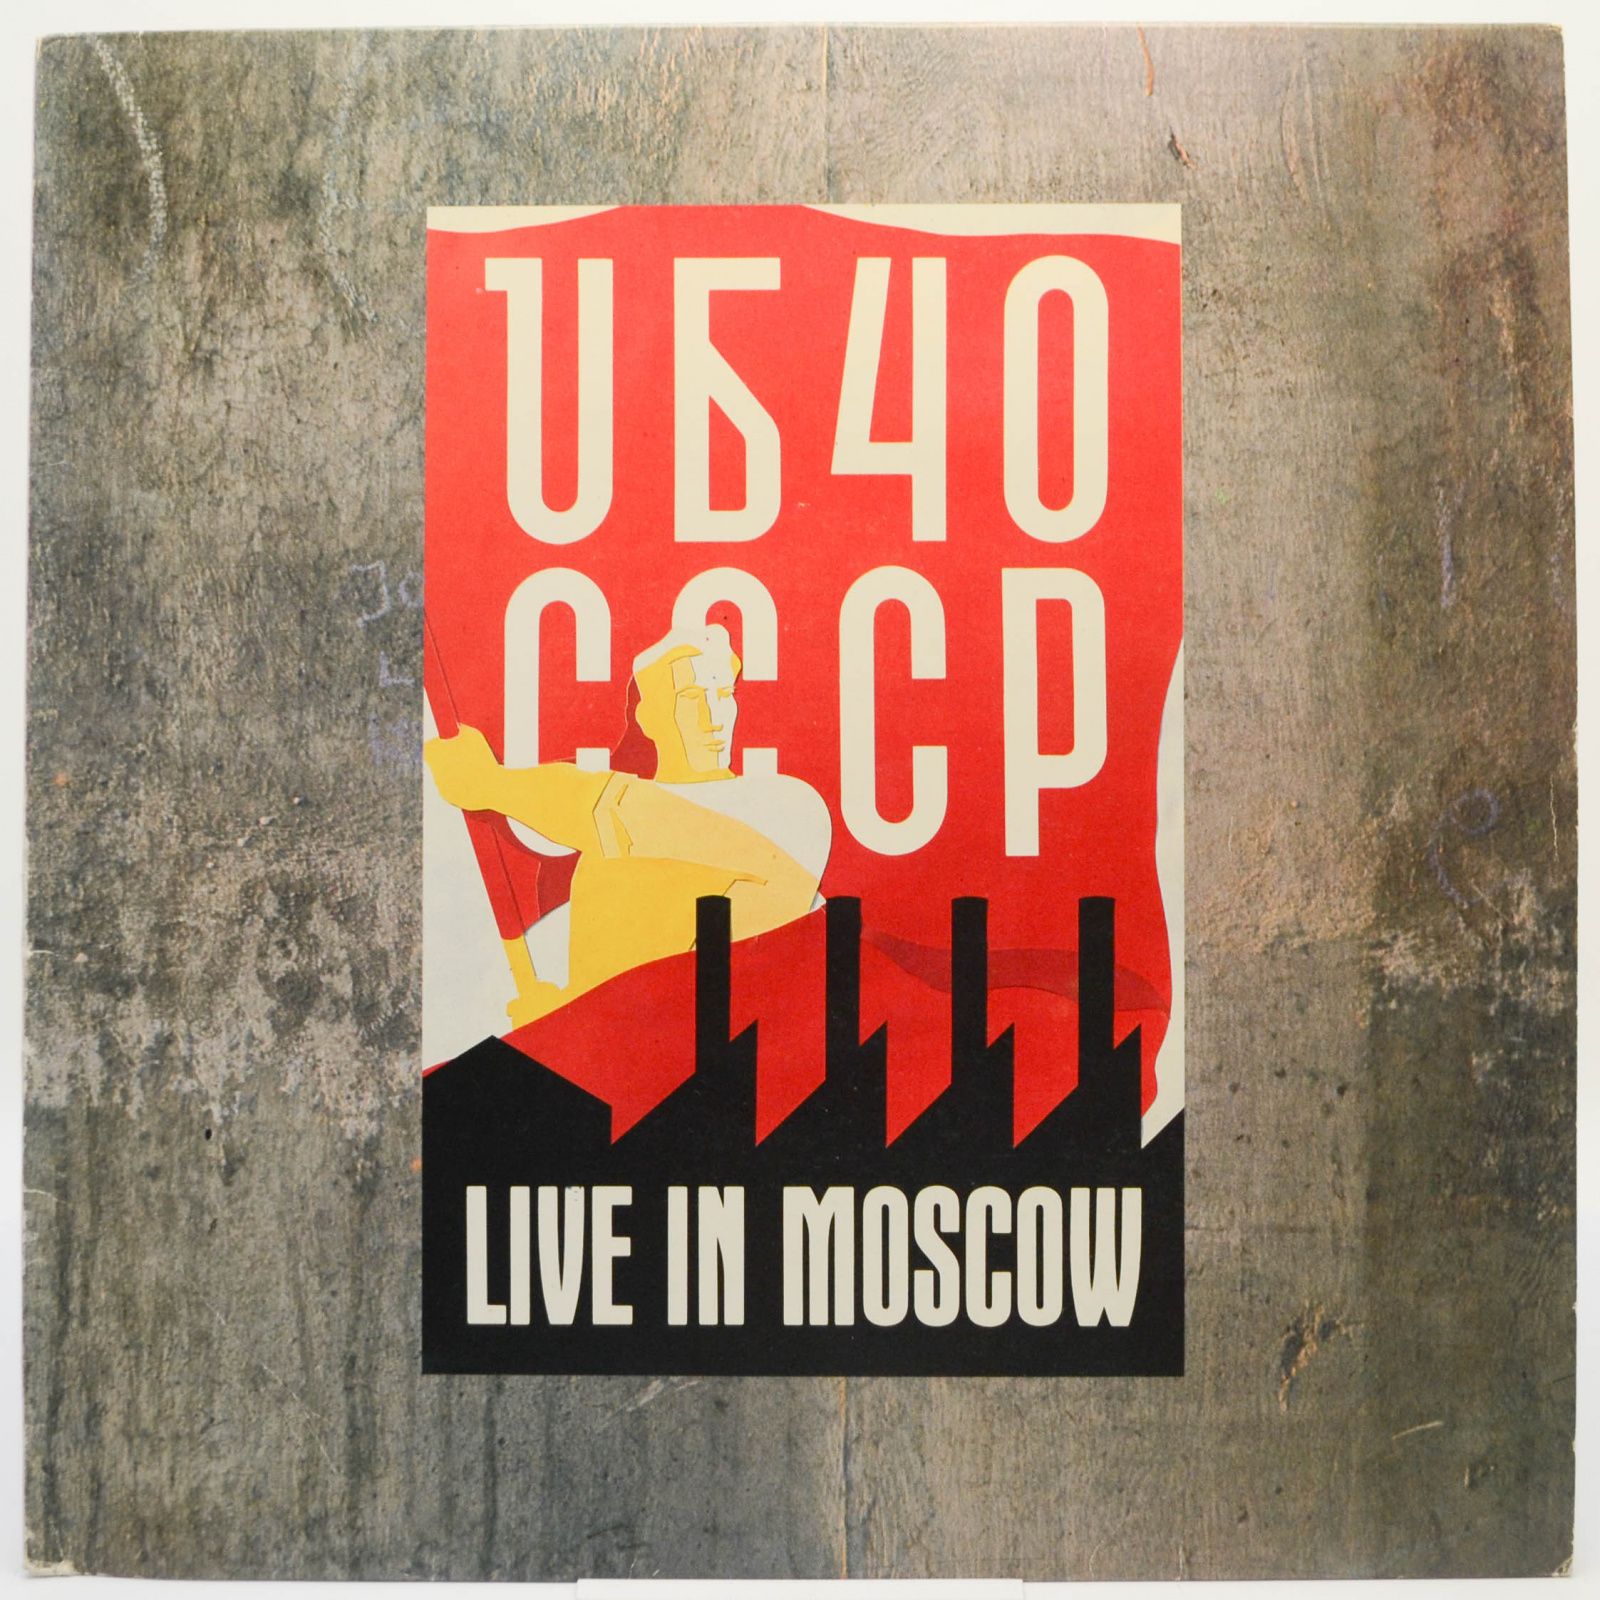 UB40 — CCCP - Live In Moscow, 1987